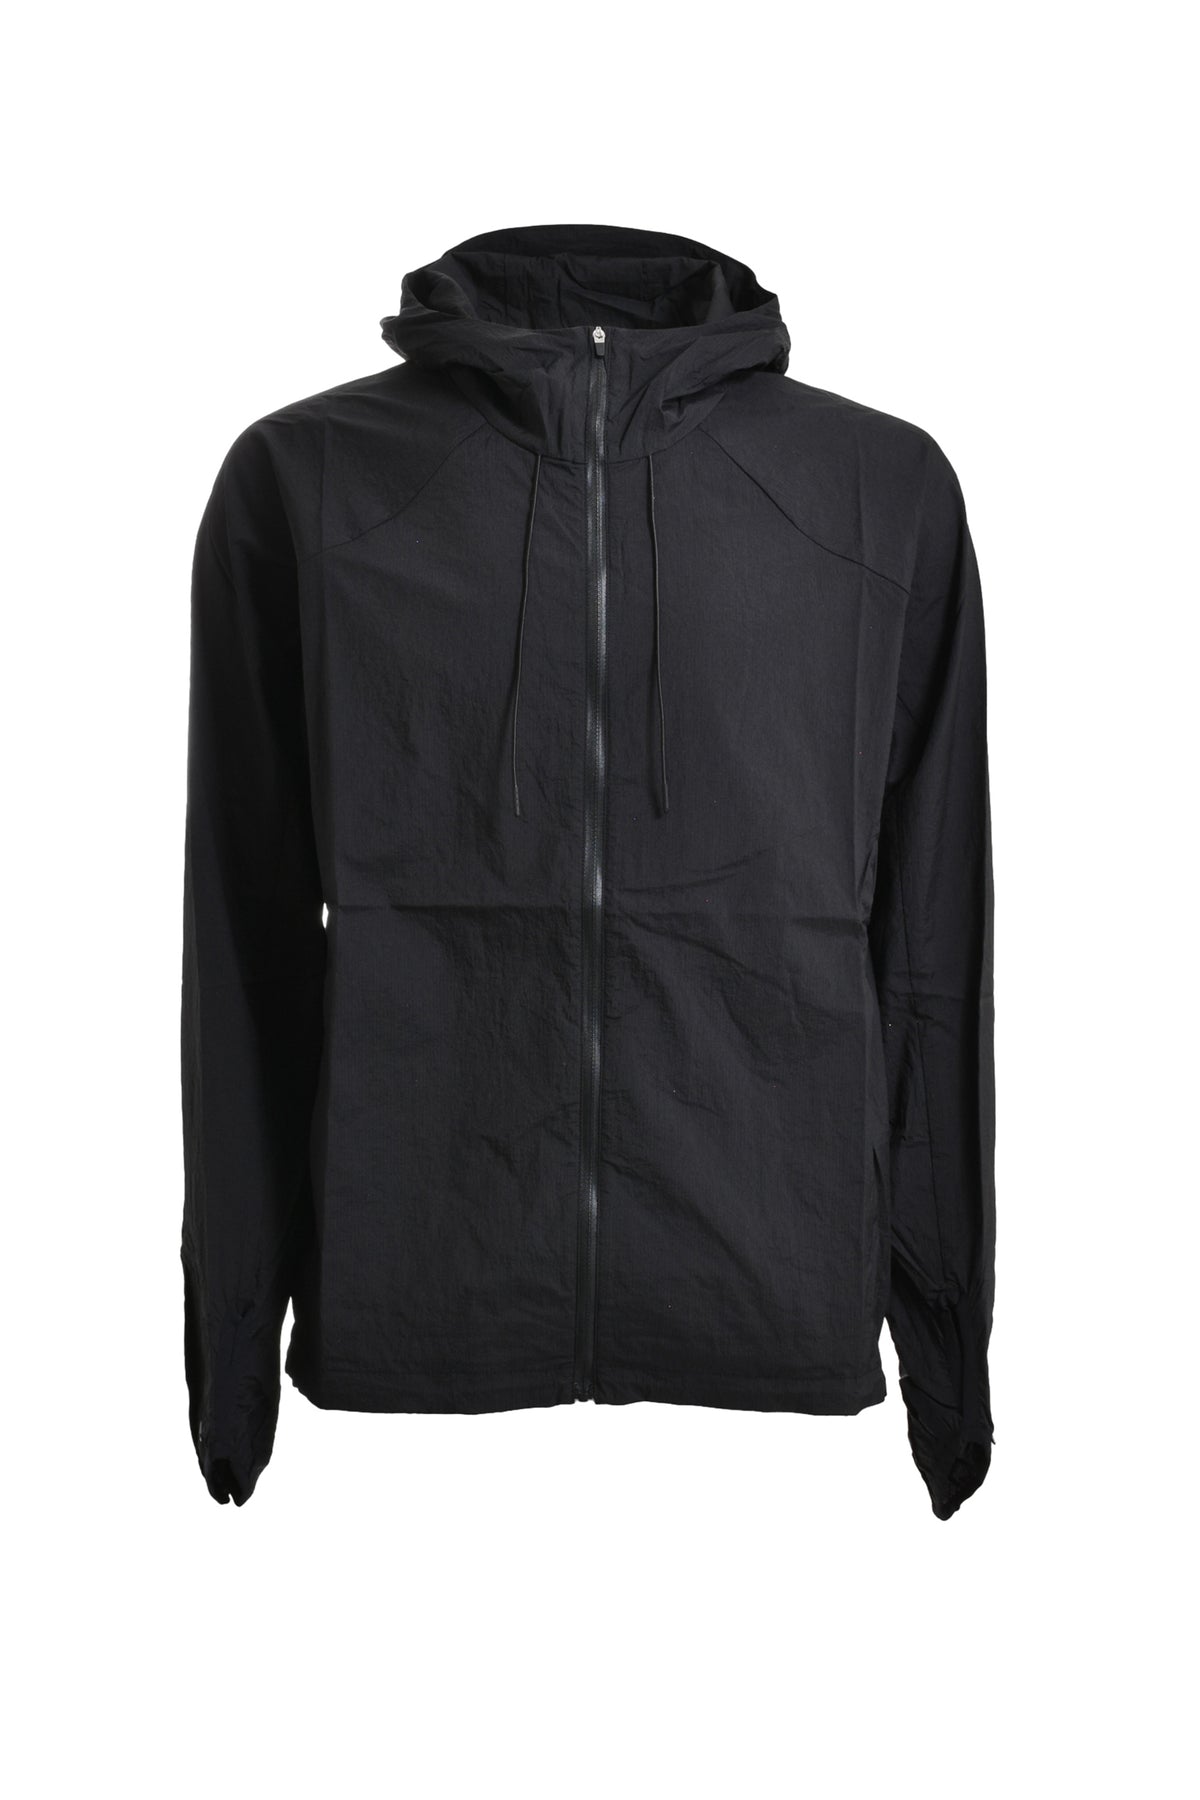 5.1 TECHNICAL JACKET RIGHT / BLK